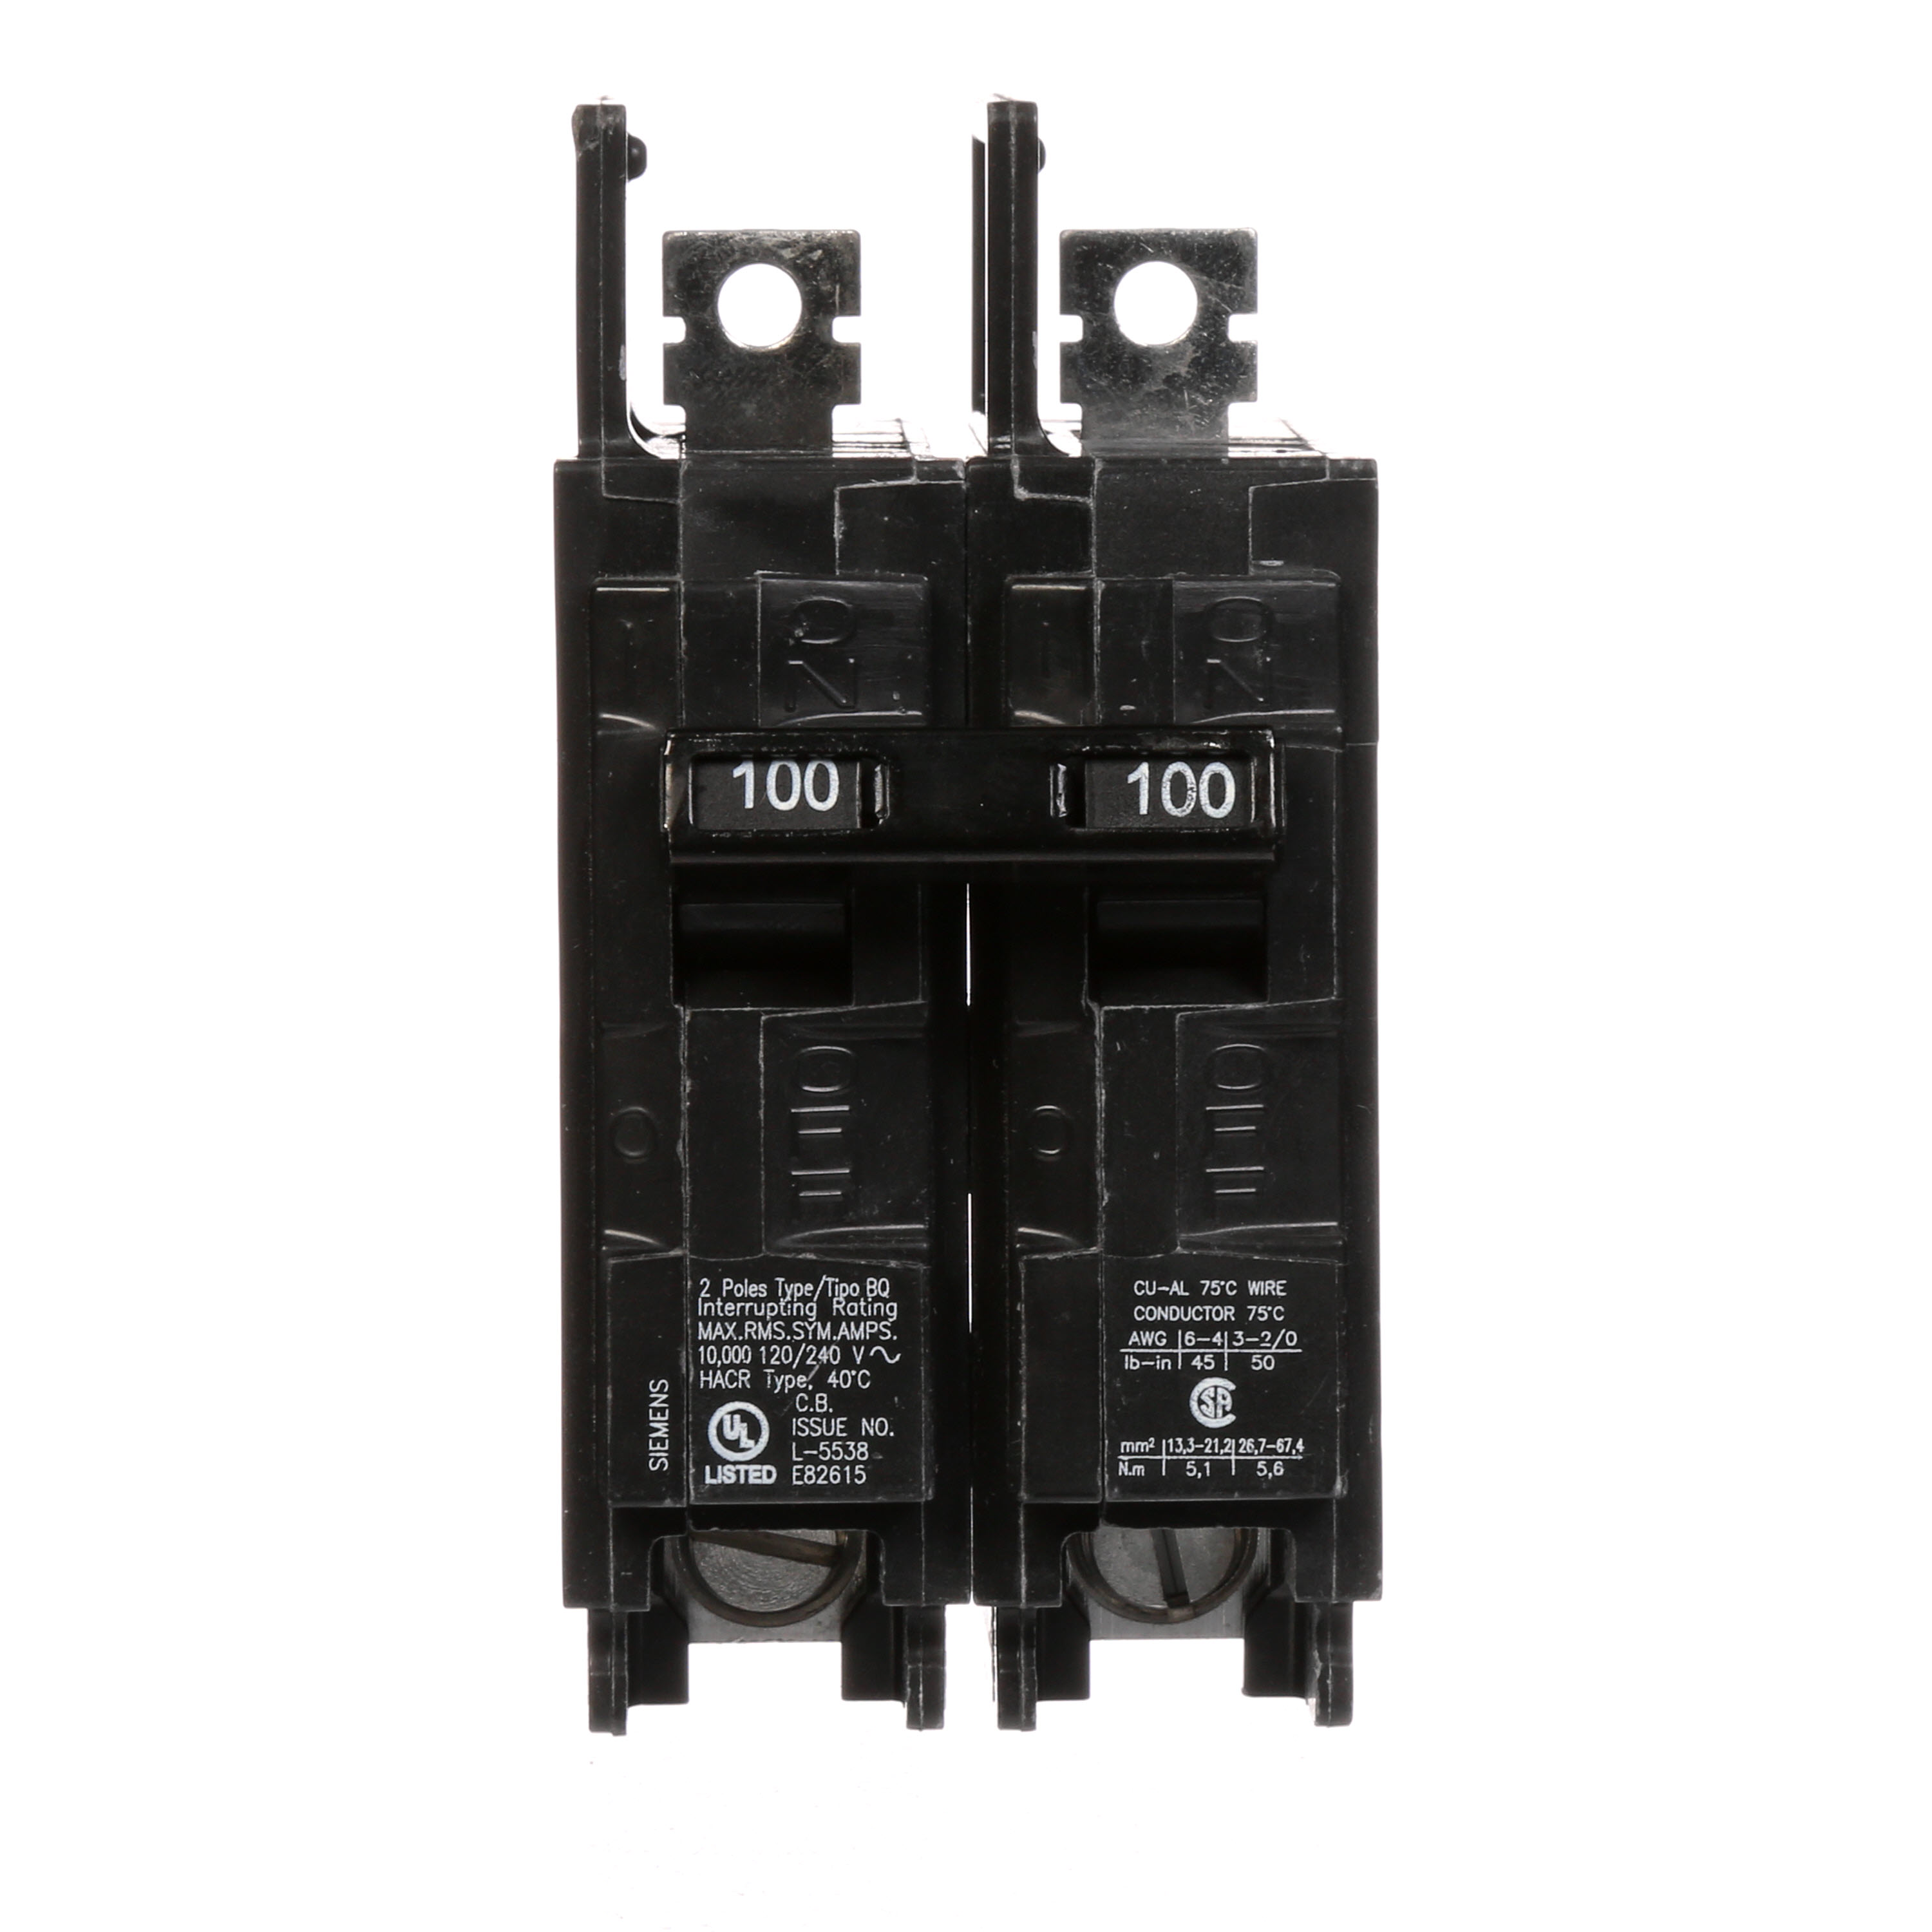 Siemens Low Voltage Molded Case Circuit Breakers General Purpose MCCBs - Type BQ, 2-Pole, 120/240VAC are Circuit Protection Molded Case Circuit Breakers. 2-Pole Common-Trip circuit breaker type BQ. Rated 120/240V (100A) (AIR 10 kA). Special features Load side lugs are included.